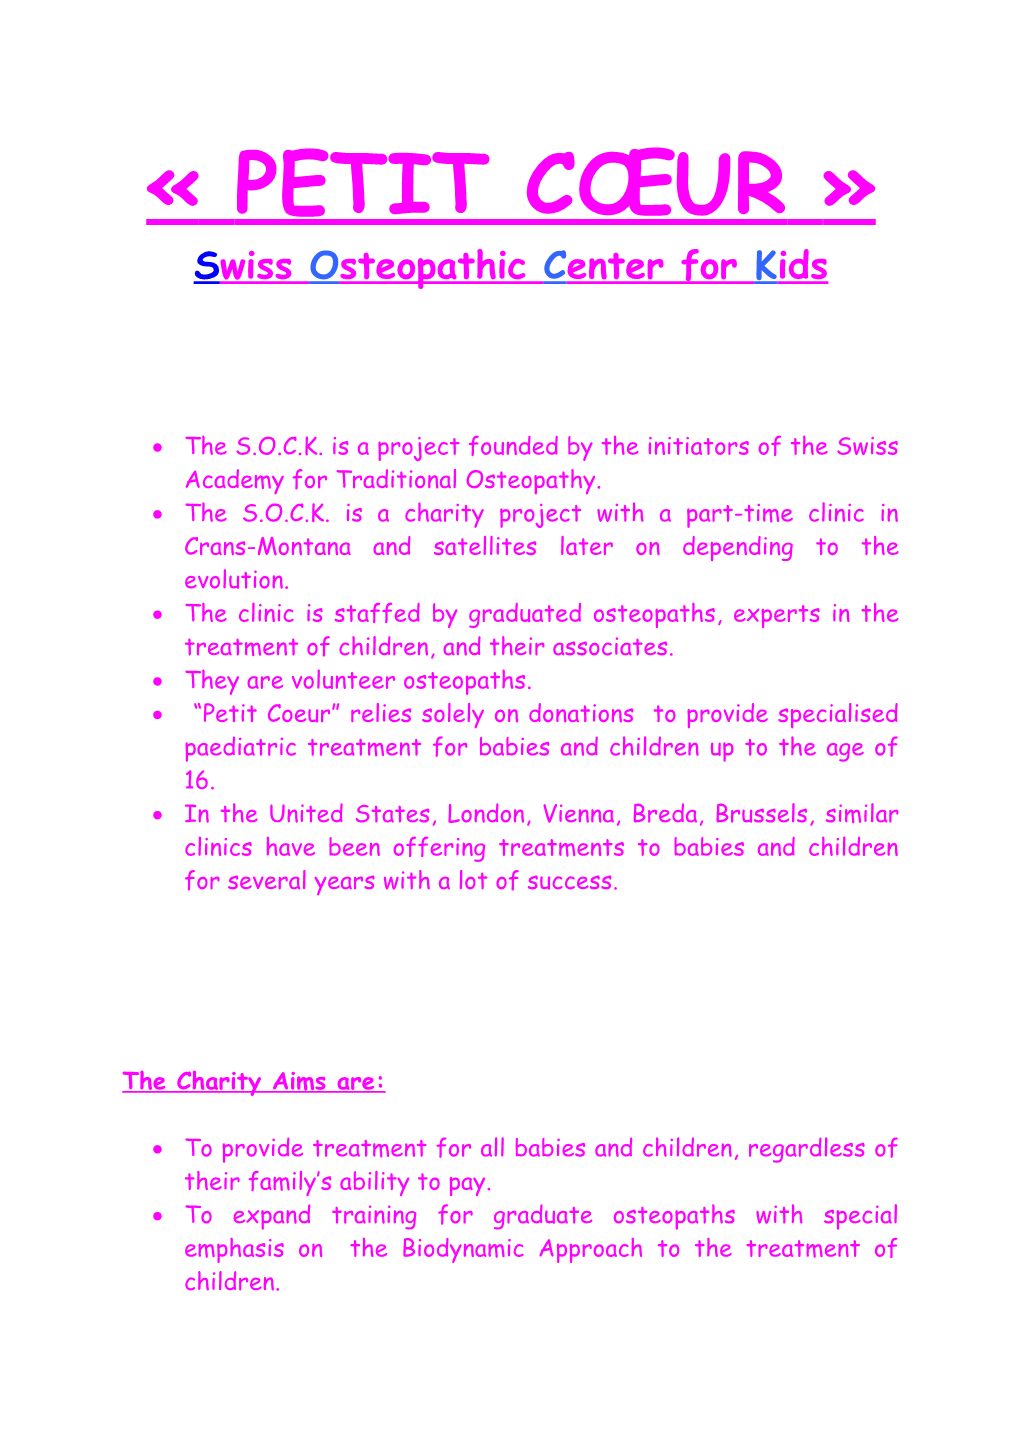 Swiss Osteopathic Center for Kids